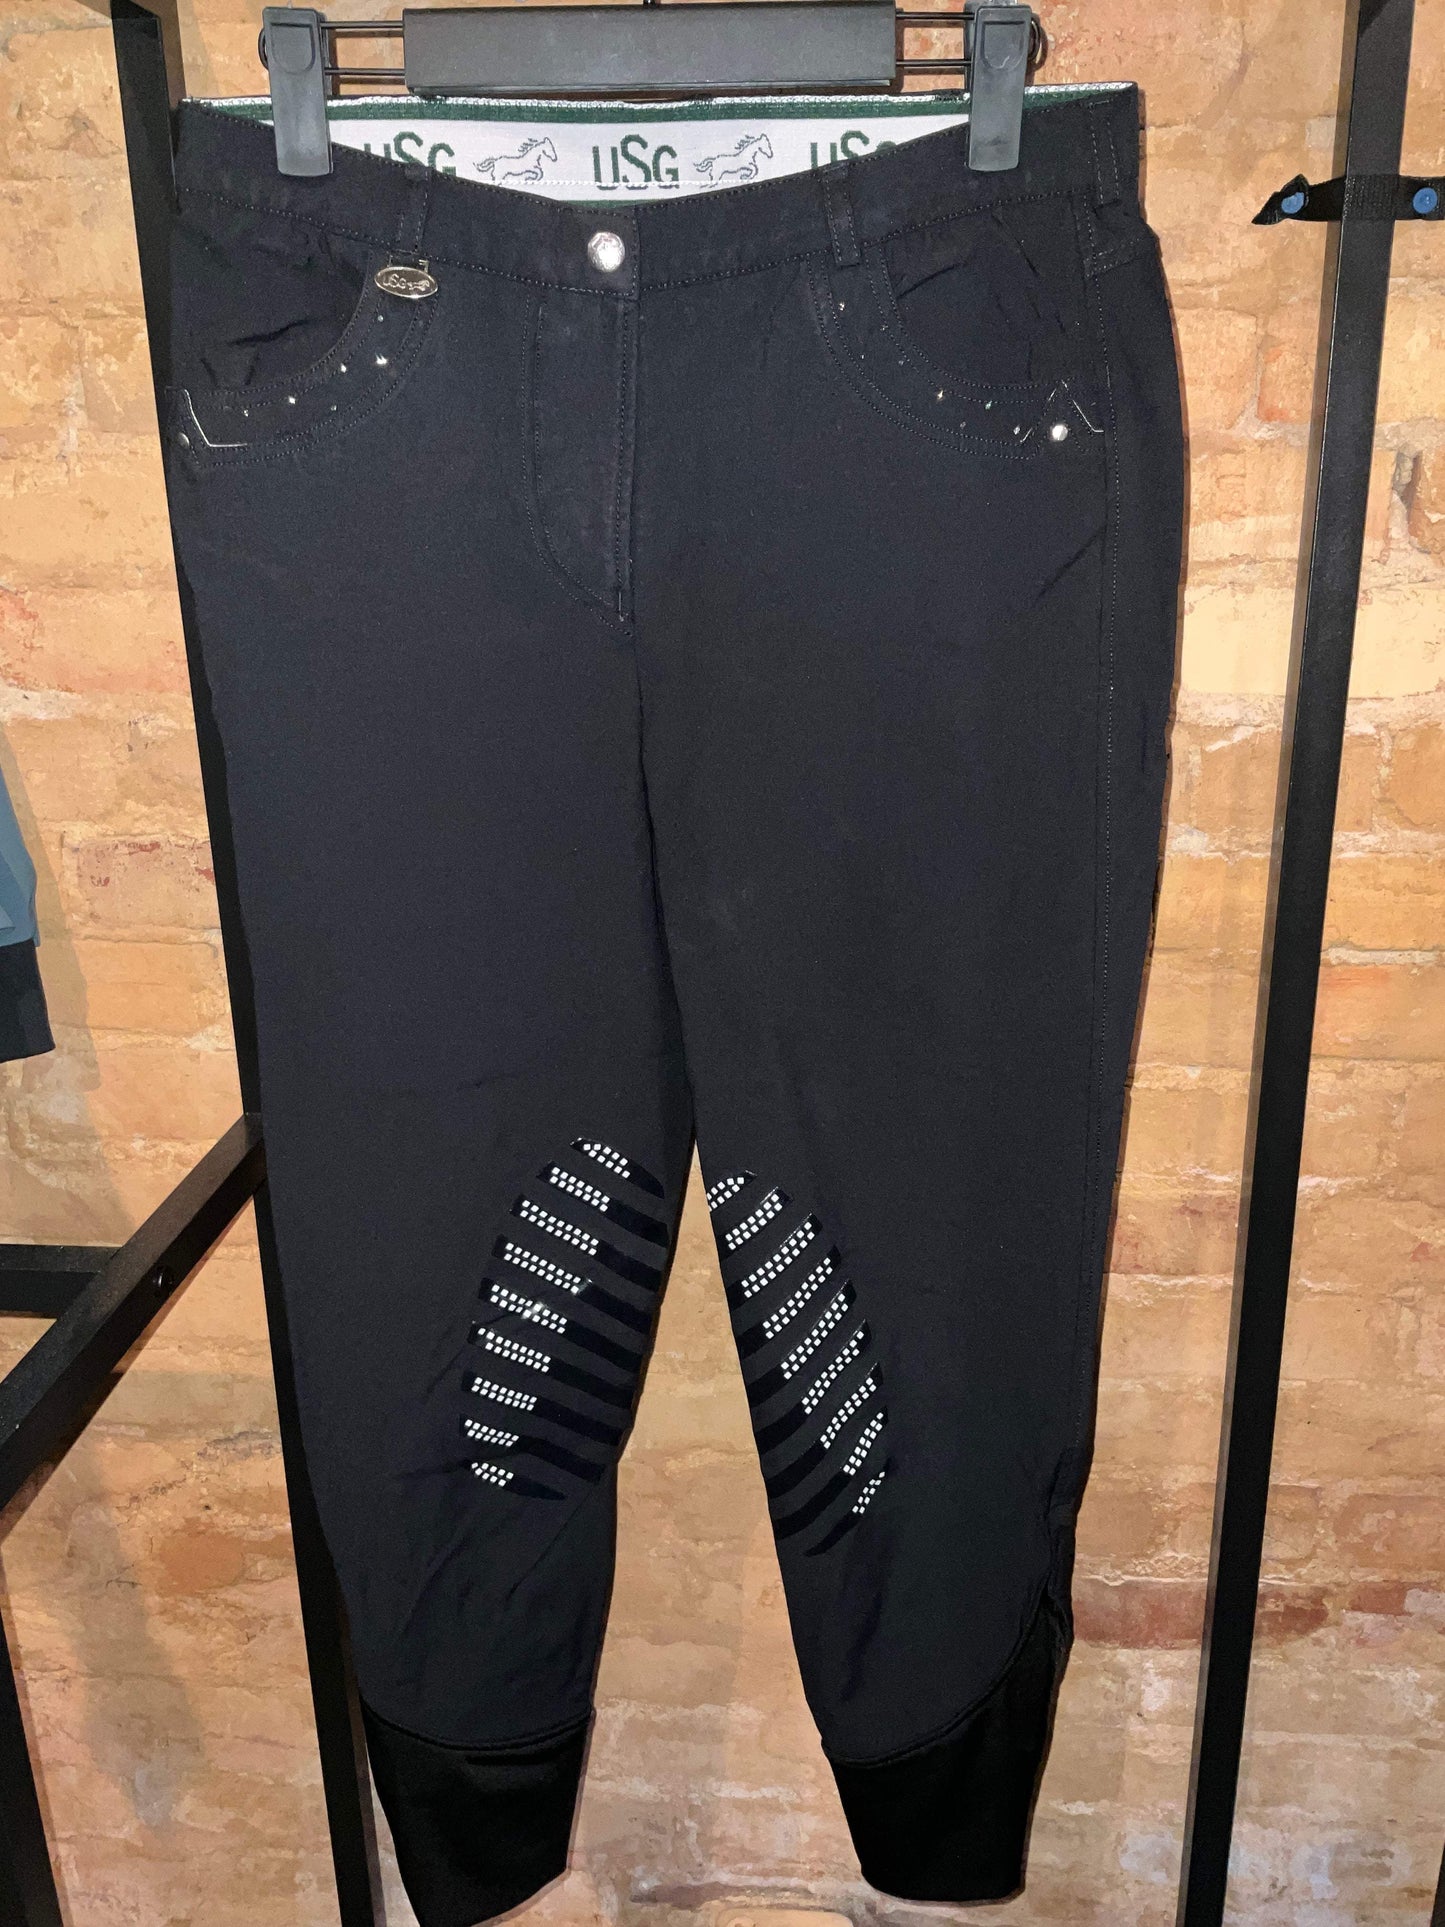 USG Size Knee Patch Breeches Size 30 US